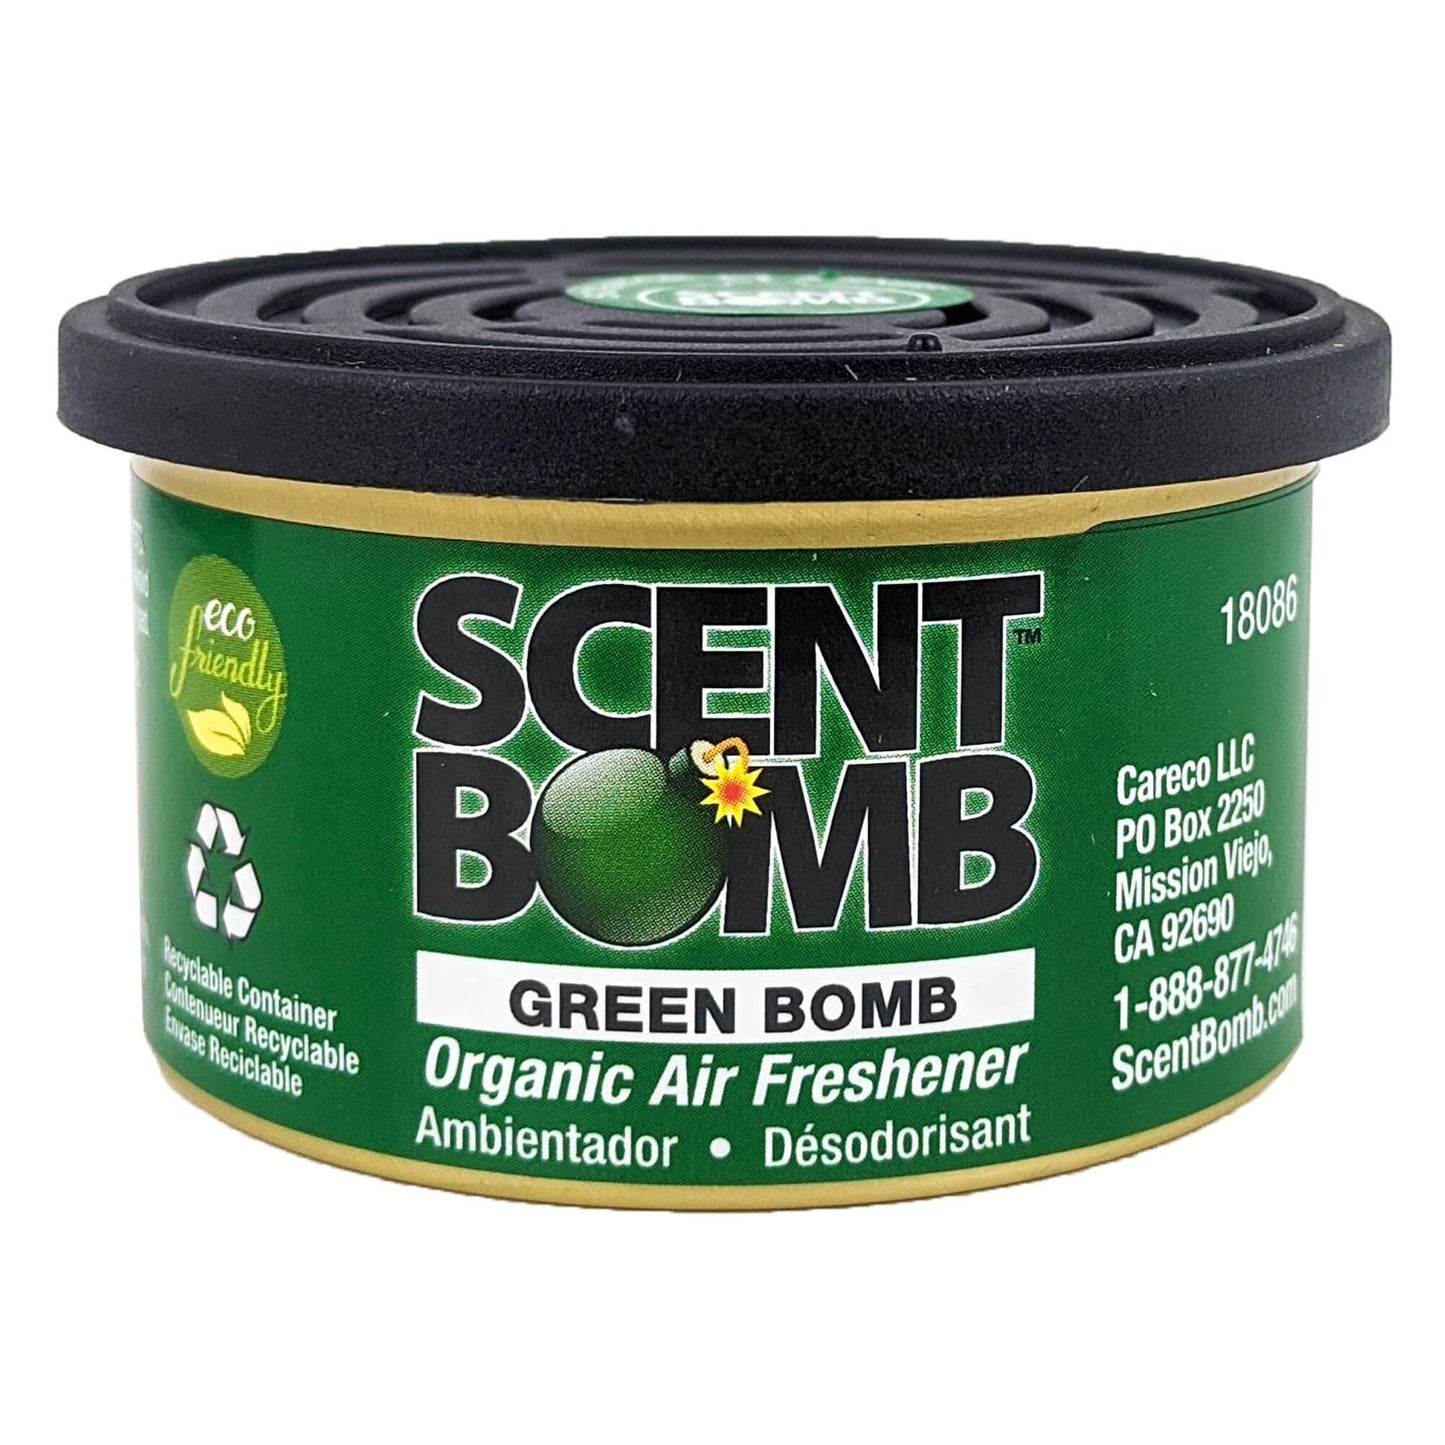 Green Bomb Scent Bomb Organic Air Freshener Scent Can